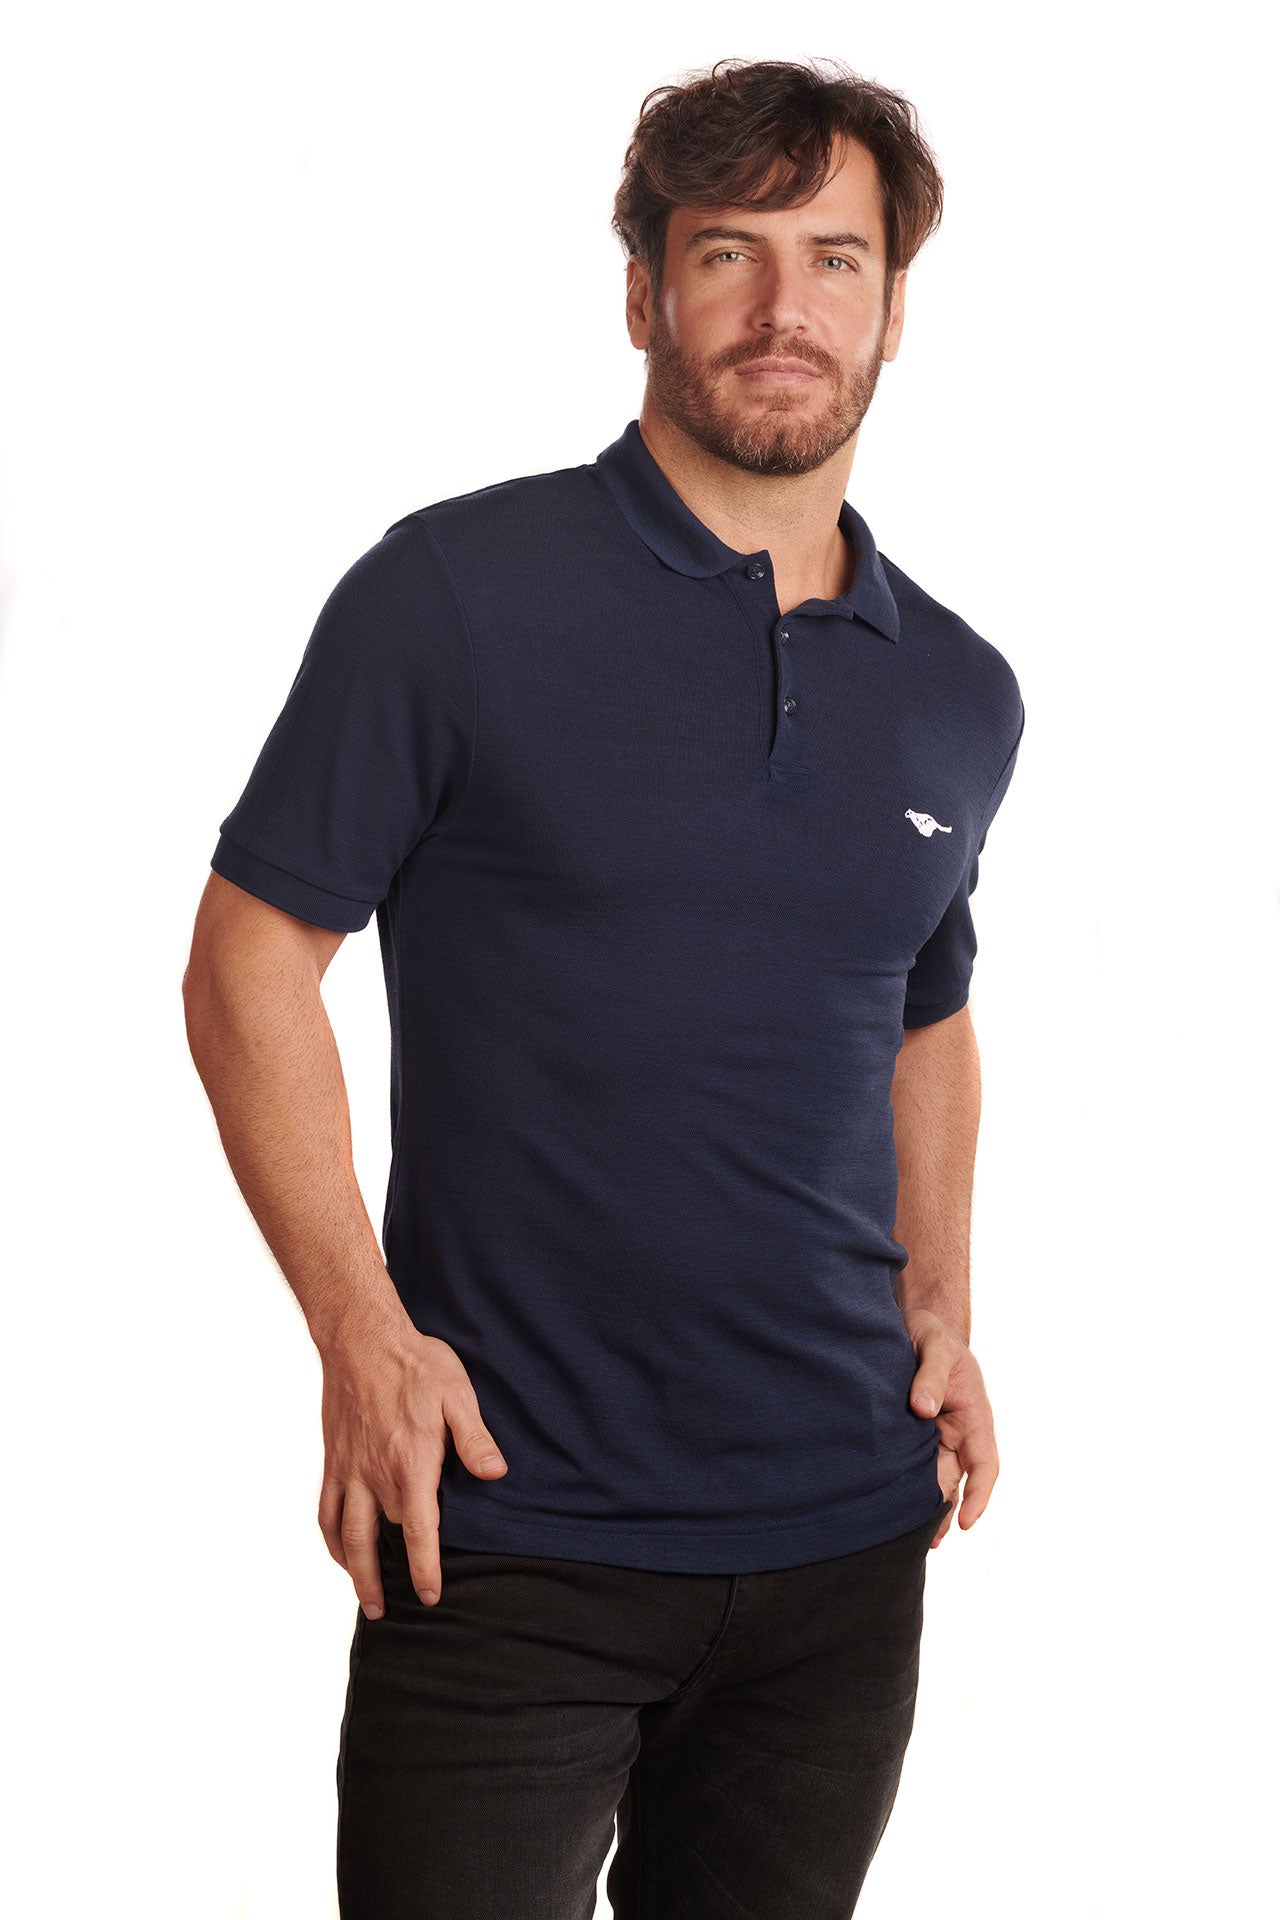 midnight-blue-biodegradable-pure-merino-wool-golf-polo-shirt-for men-by-snöleo.-front-of-model-view.